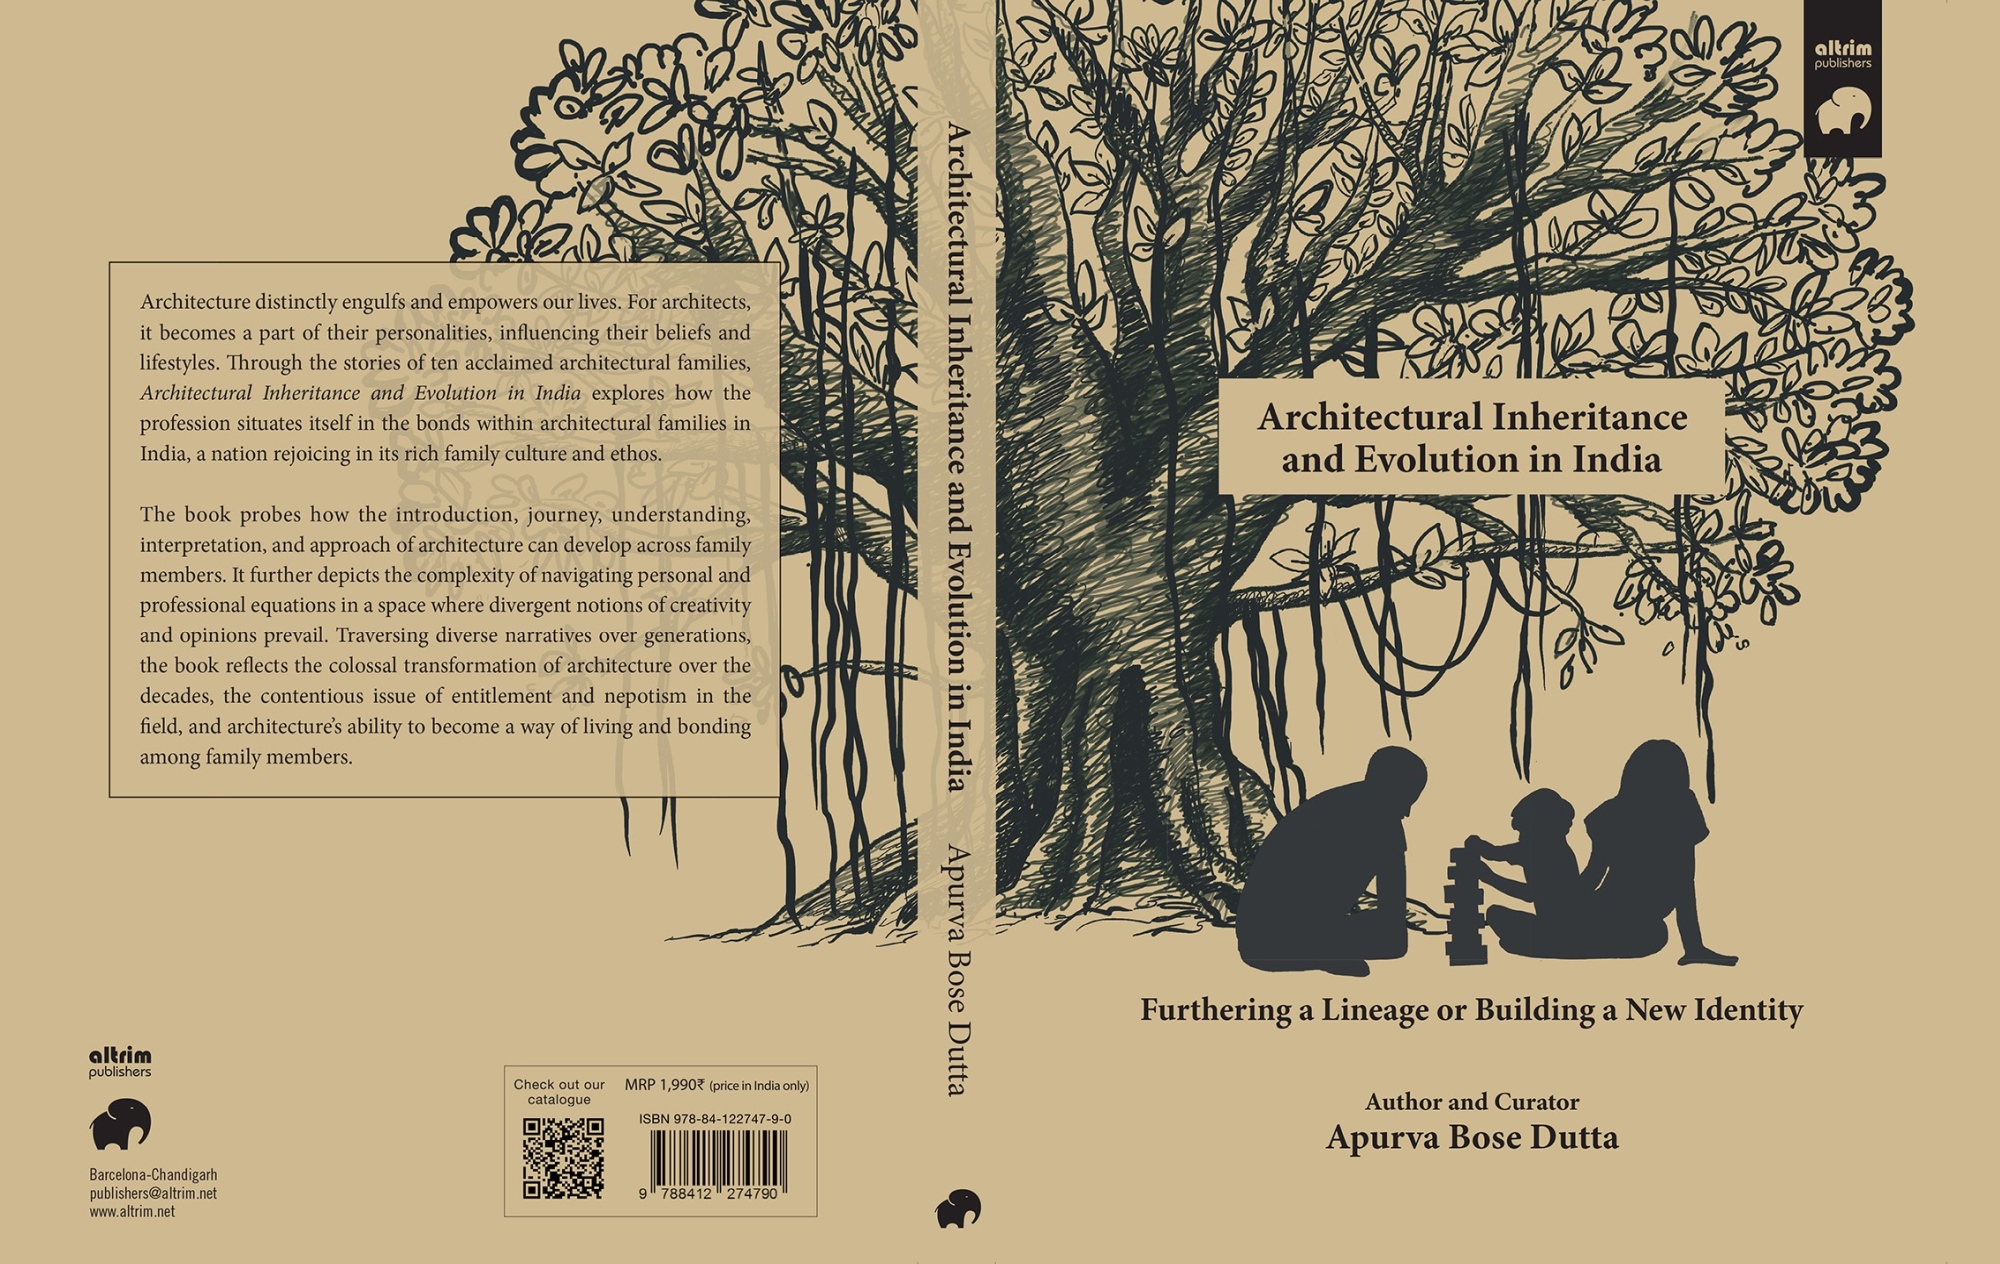 Book Announcement: Architectural Inheritance and Evolution of India